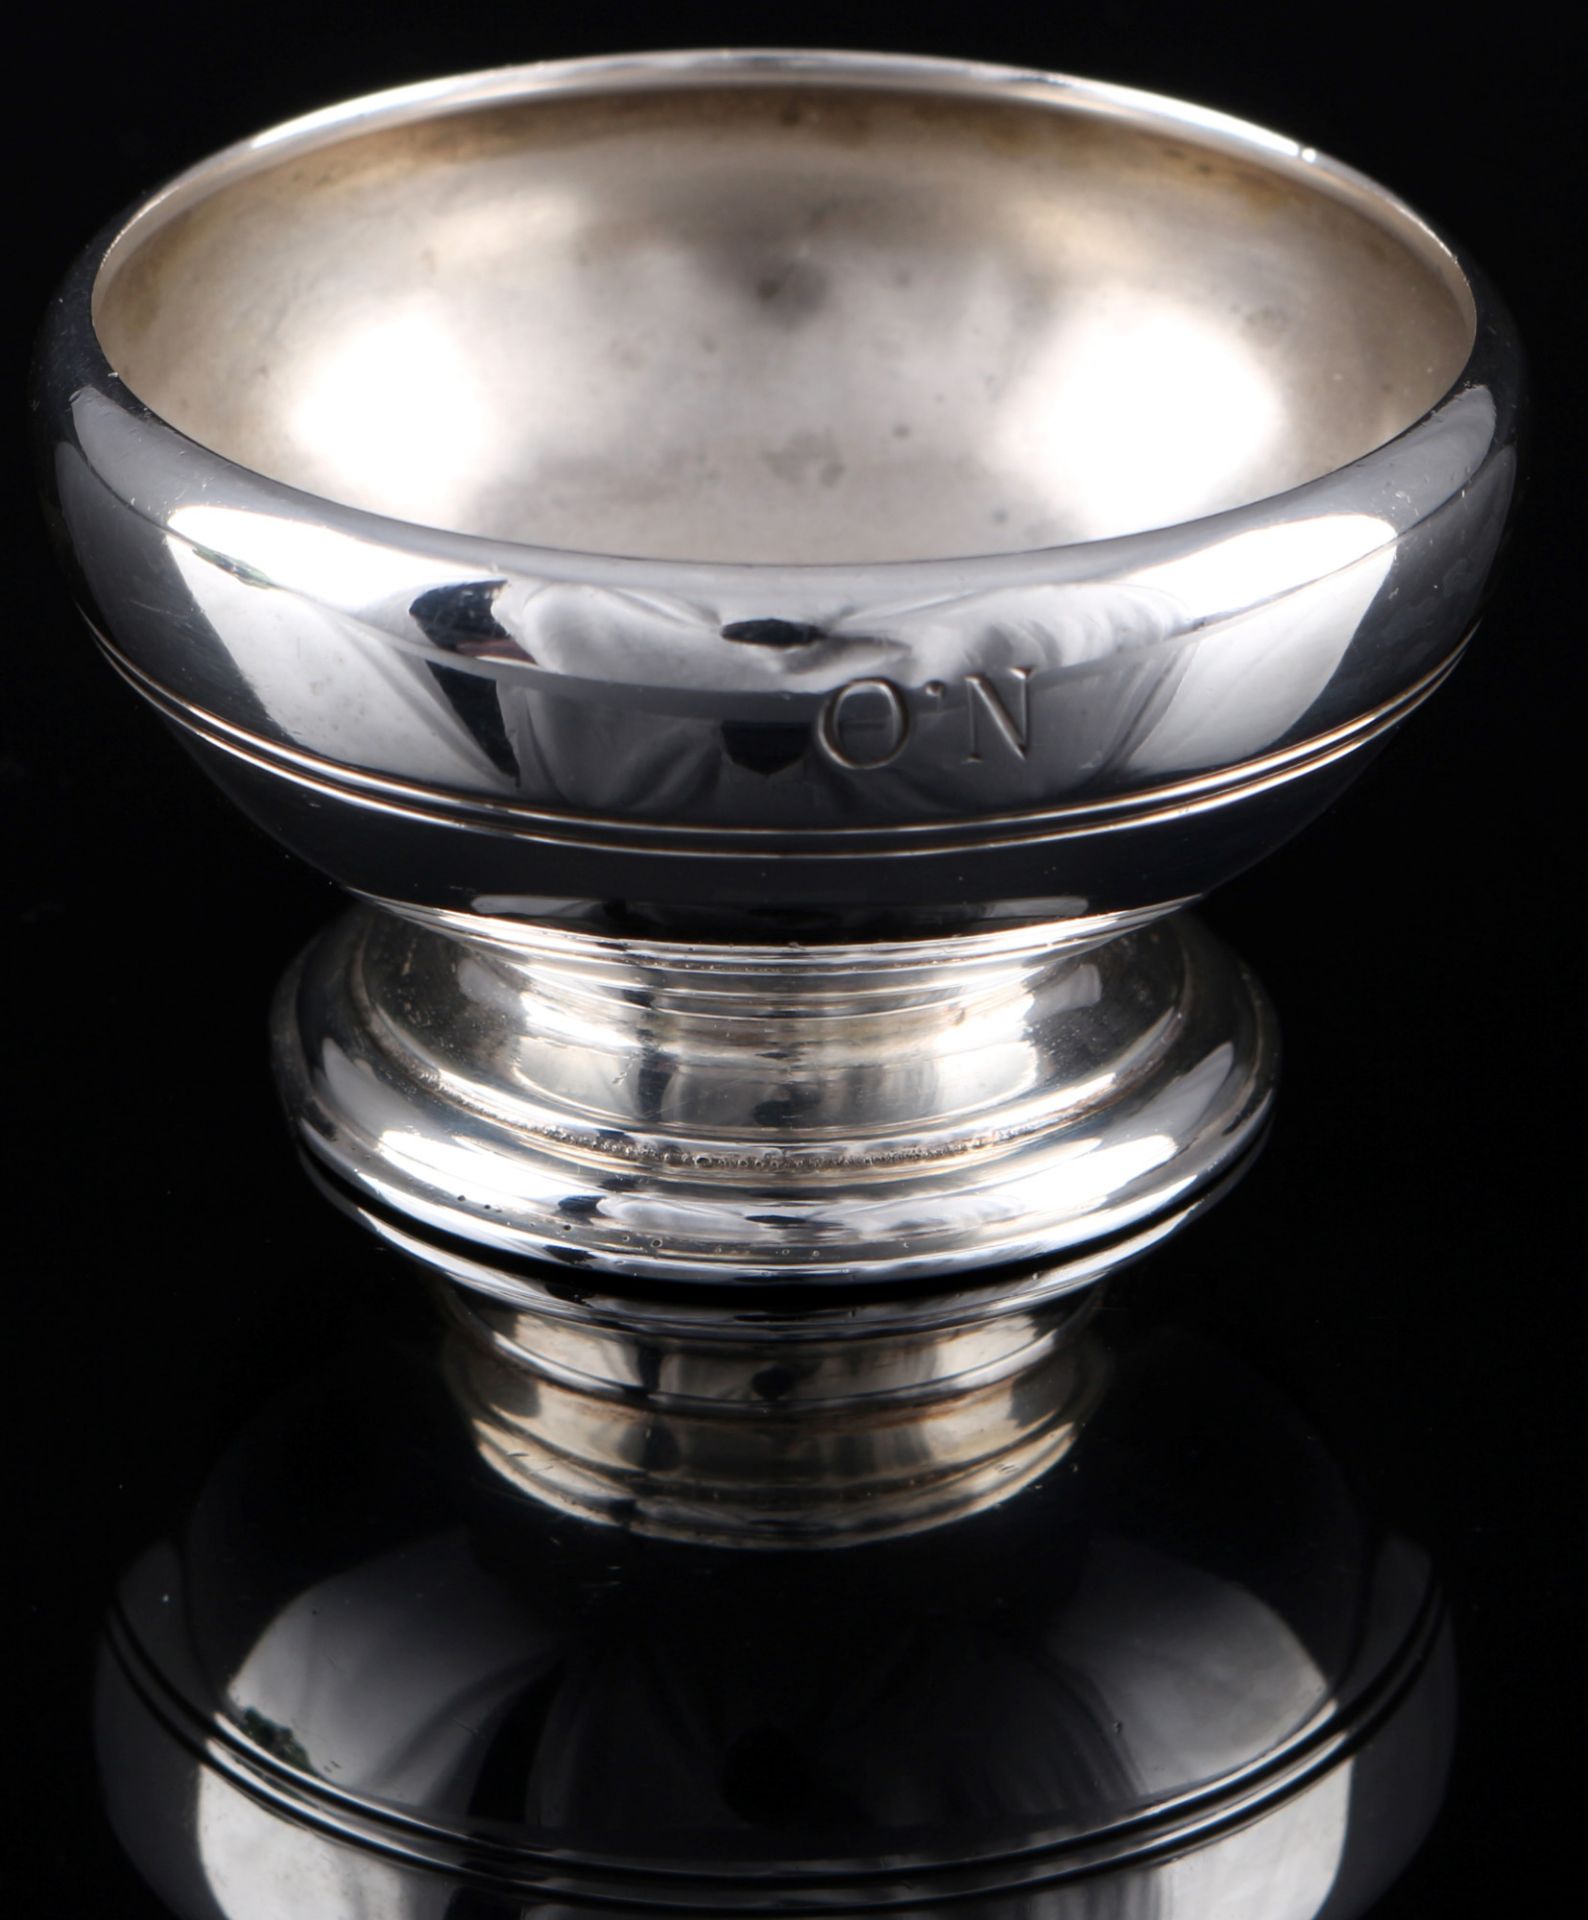 Tiffany & Co. 925 sterling silver pair of bowls 20166, Silber Paar Schalen, - Image 3 of 5